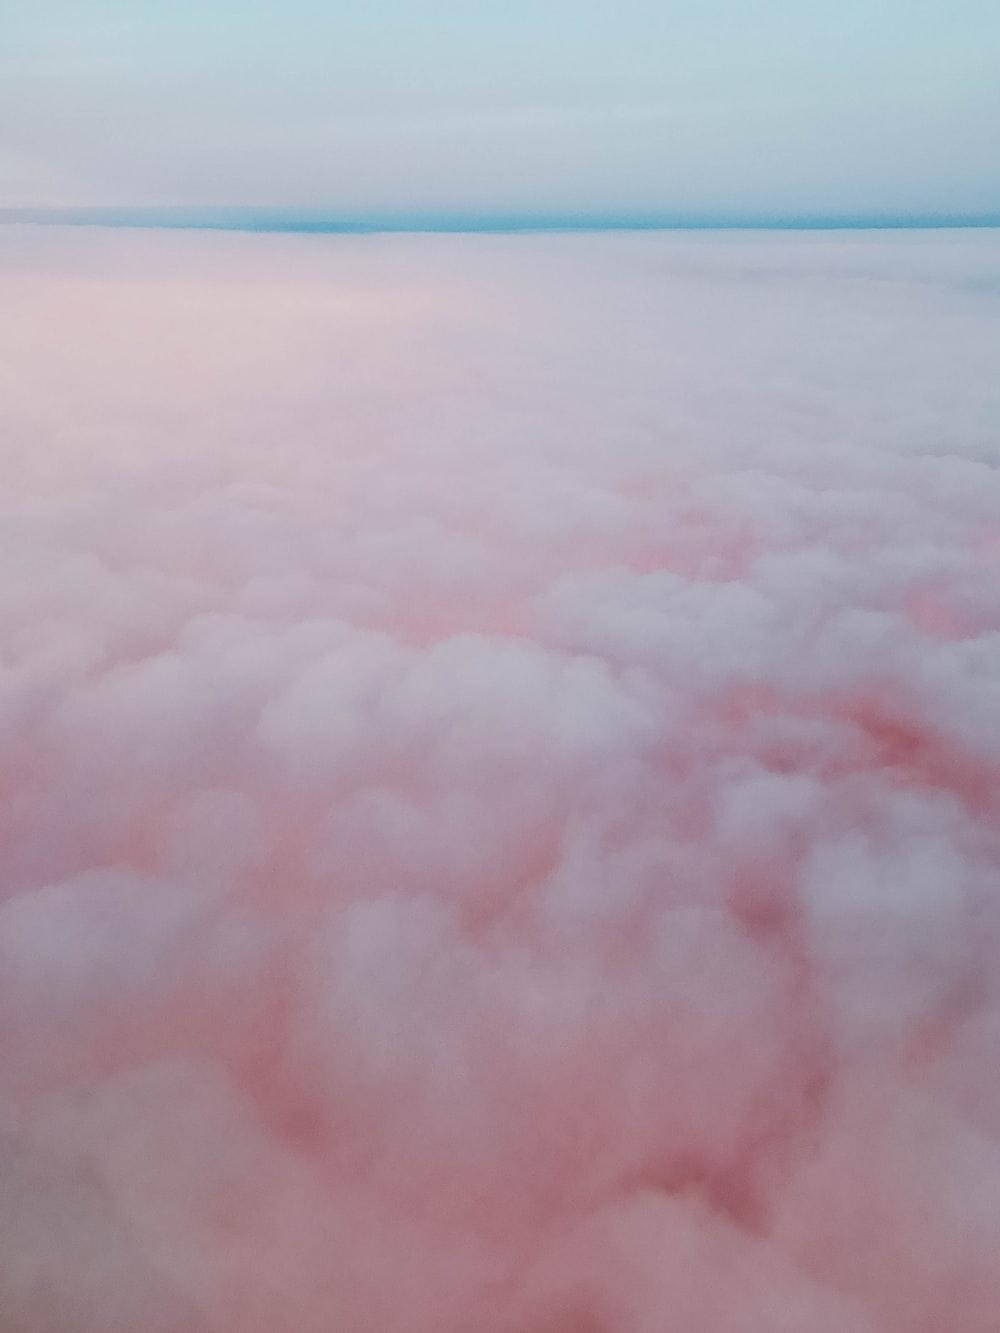 Cotton Candy Picture. Download Free Image